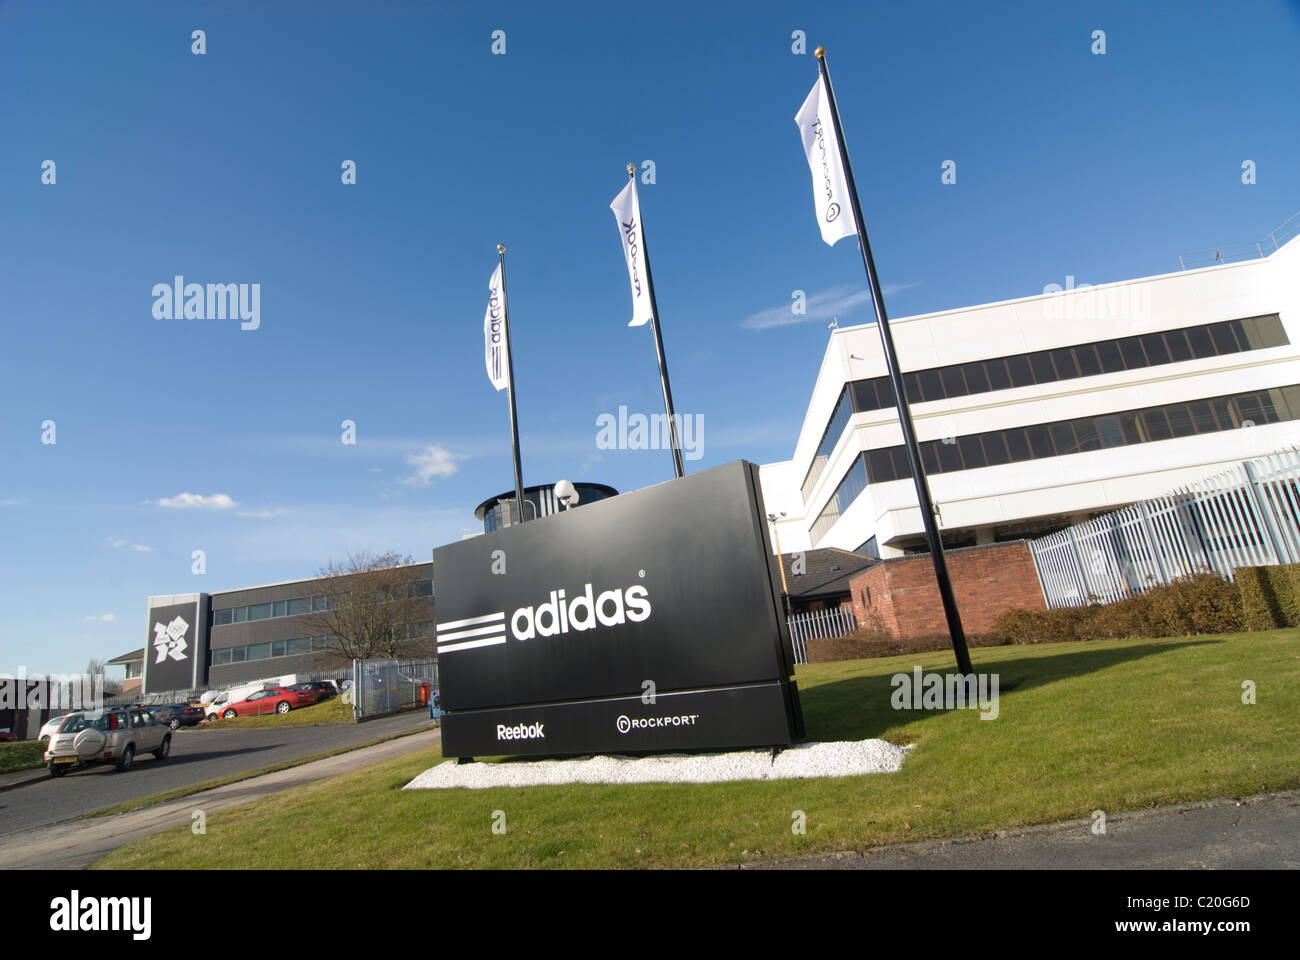 adidas and reebok outlet stockport